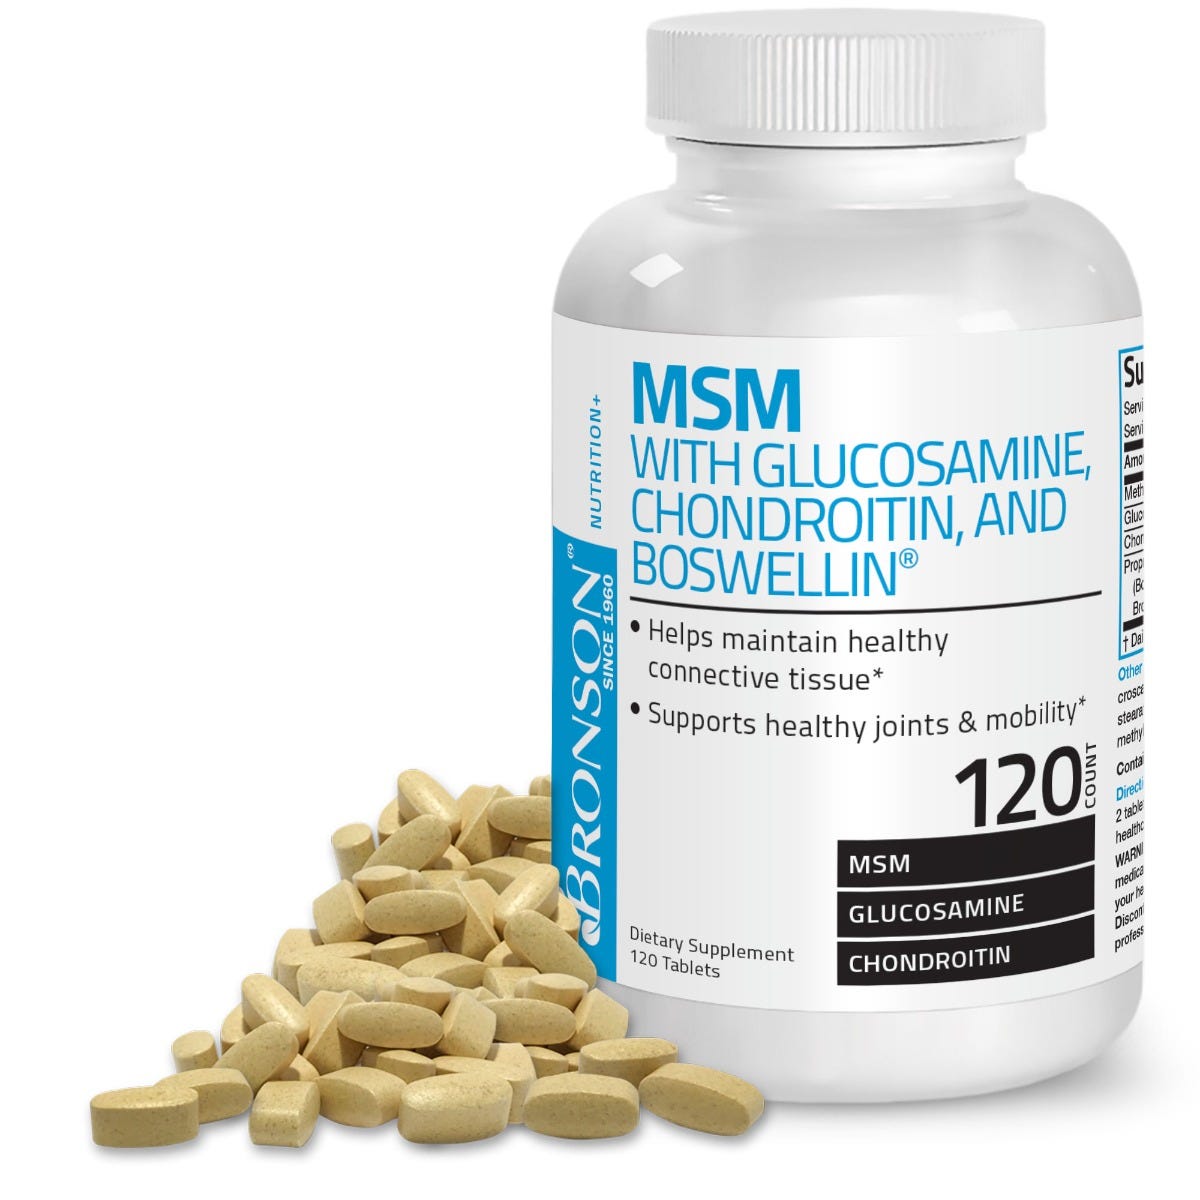 MSM with Glucosamine, Chondroitin, Boswellin® view 2 of 6